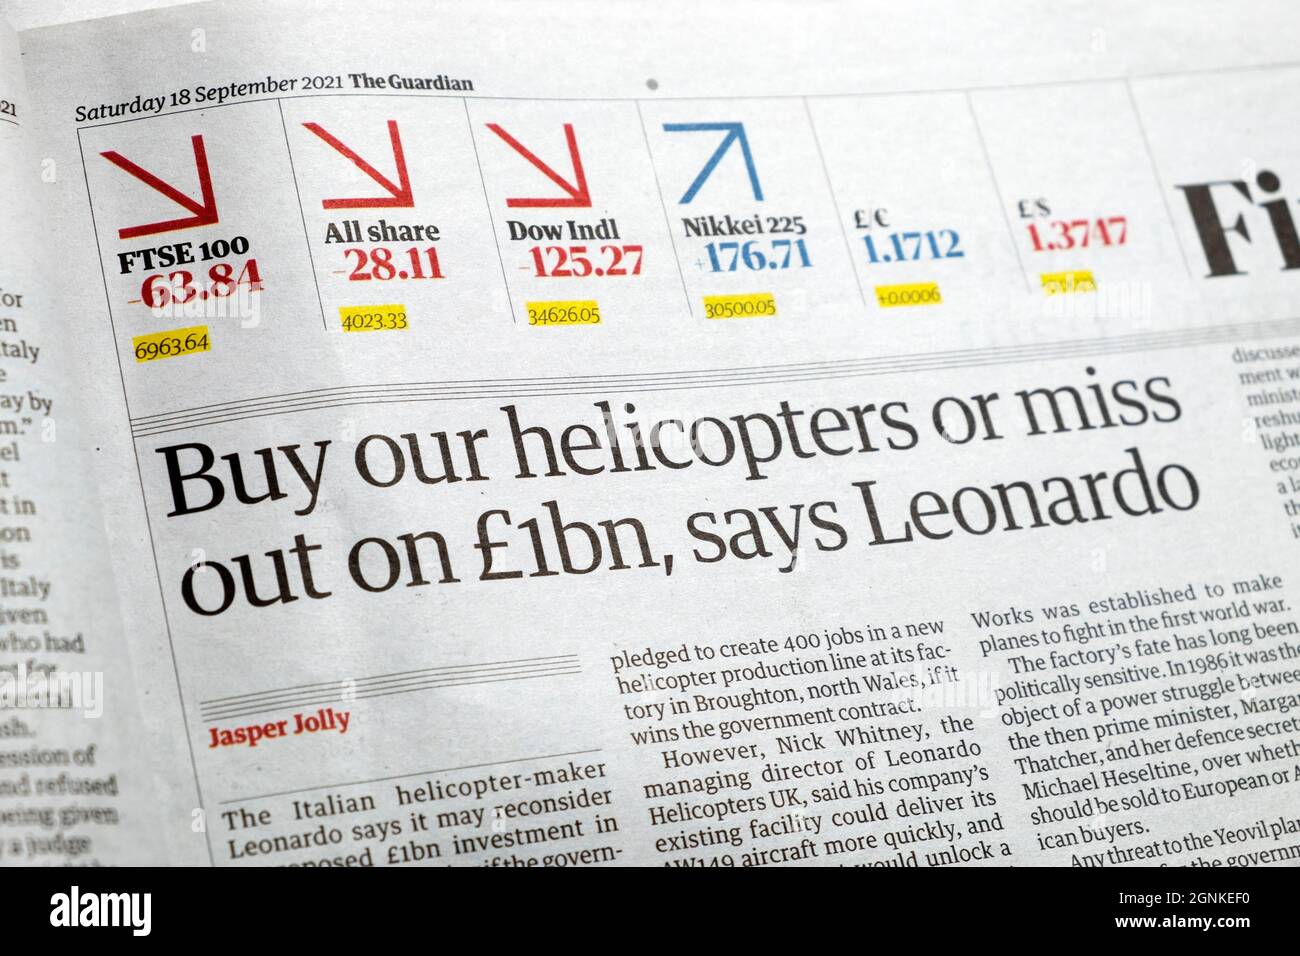 'Buy our helicopters or miss out on £1bn, says Leonardo' in Guardian Financial newspaper headline article18 September 2021 London UK Stock Photo